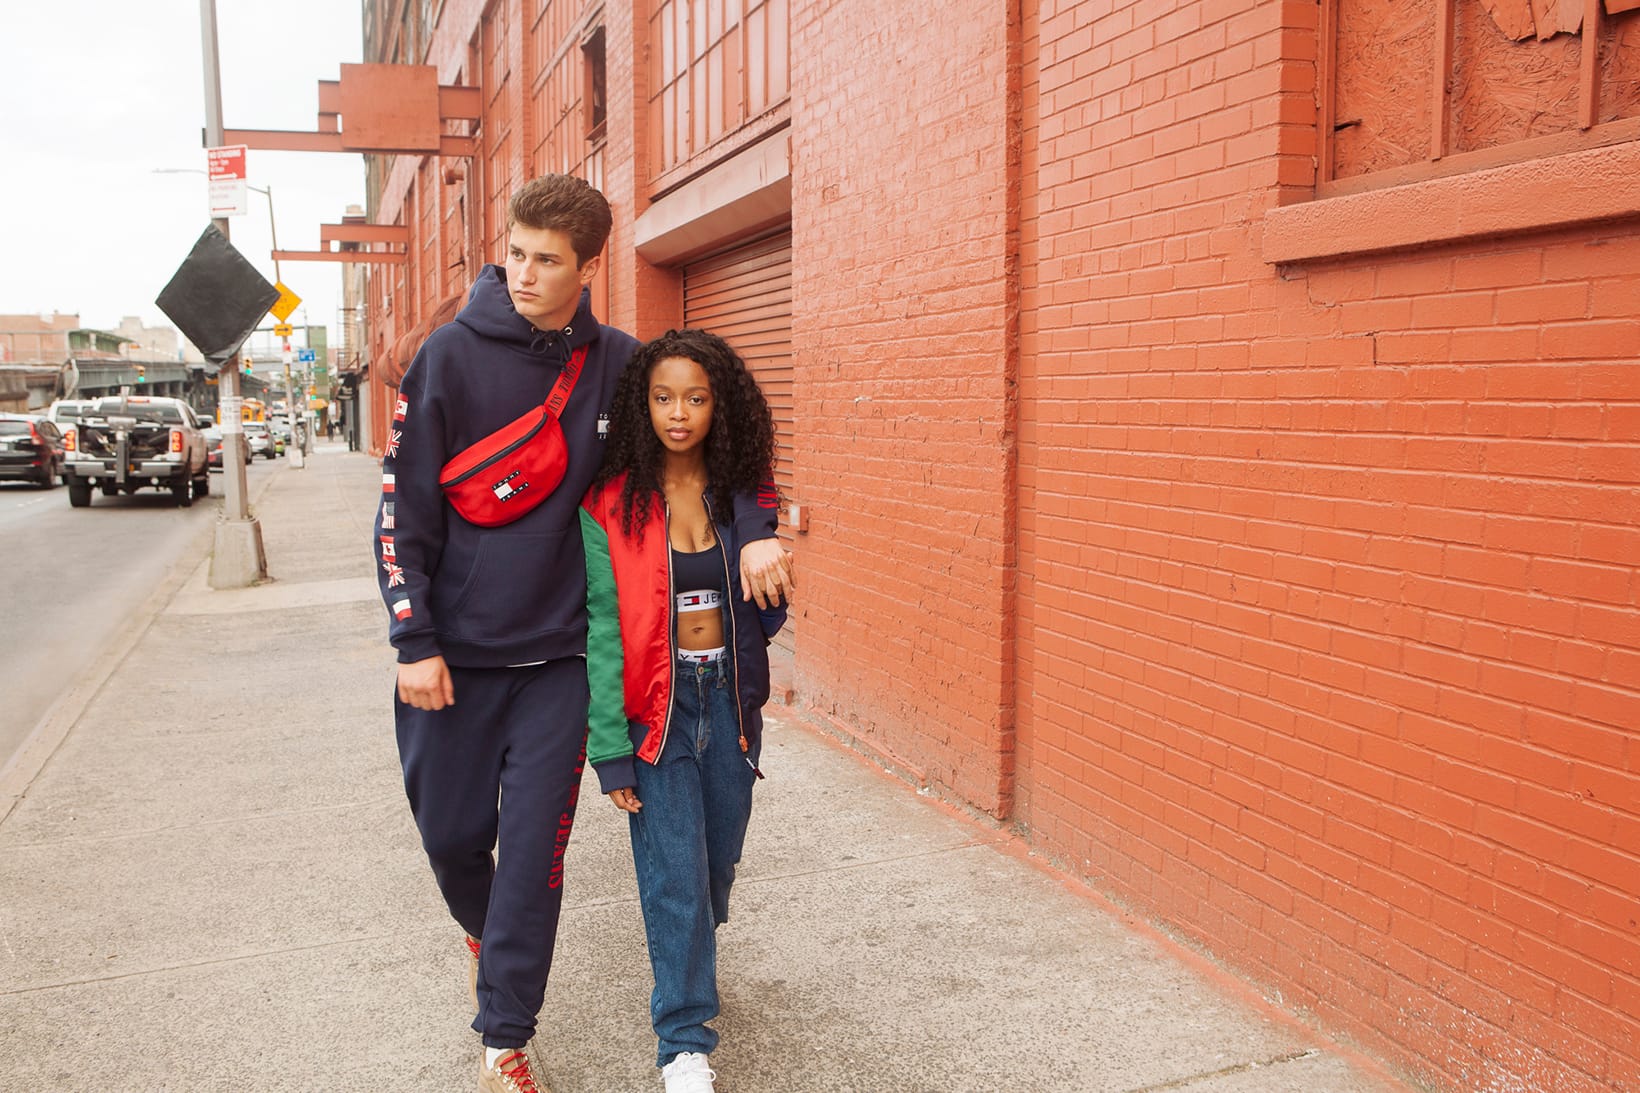 tommy jeans capsule 6.0